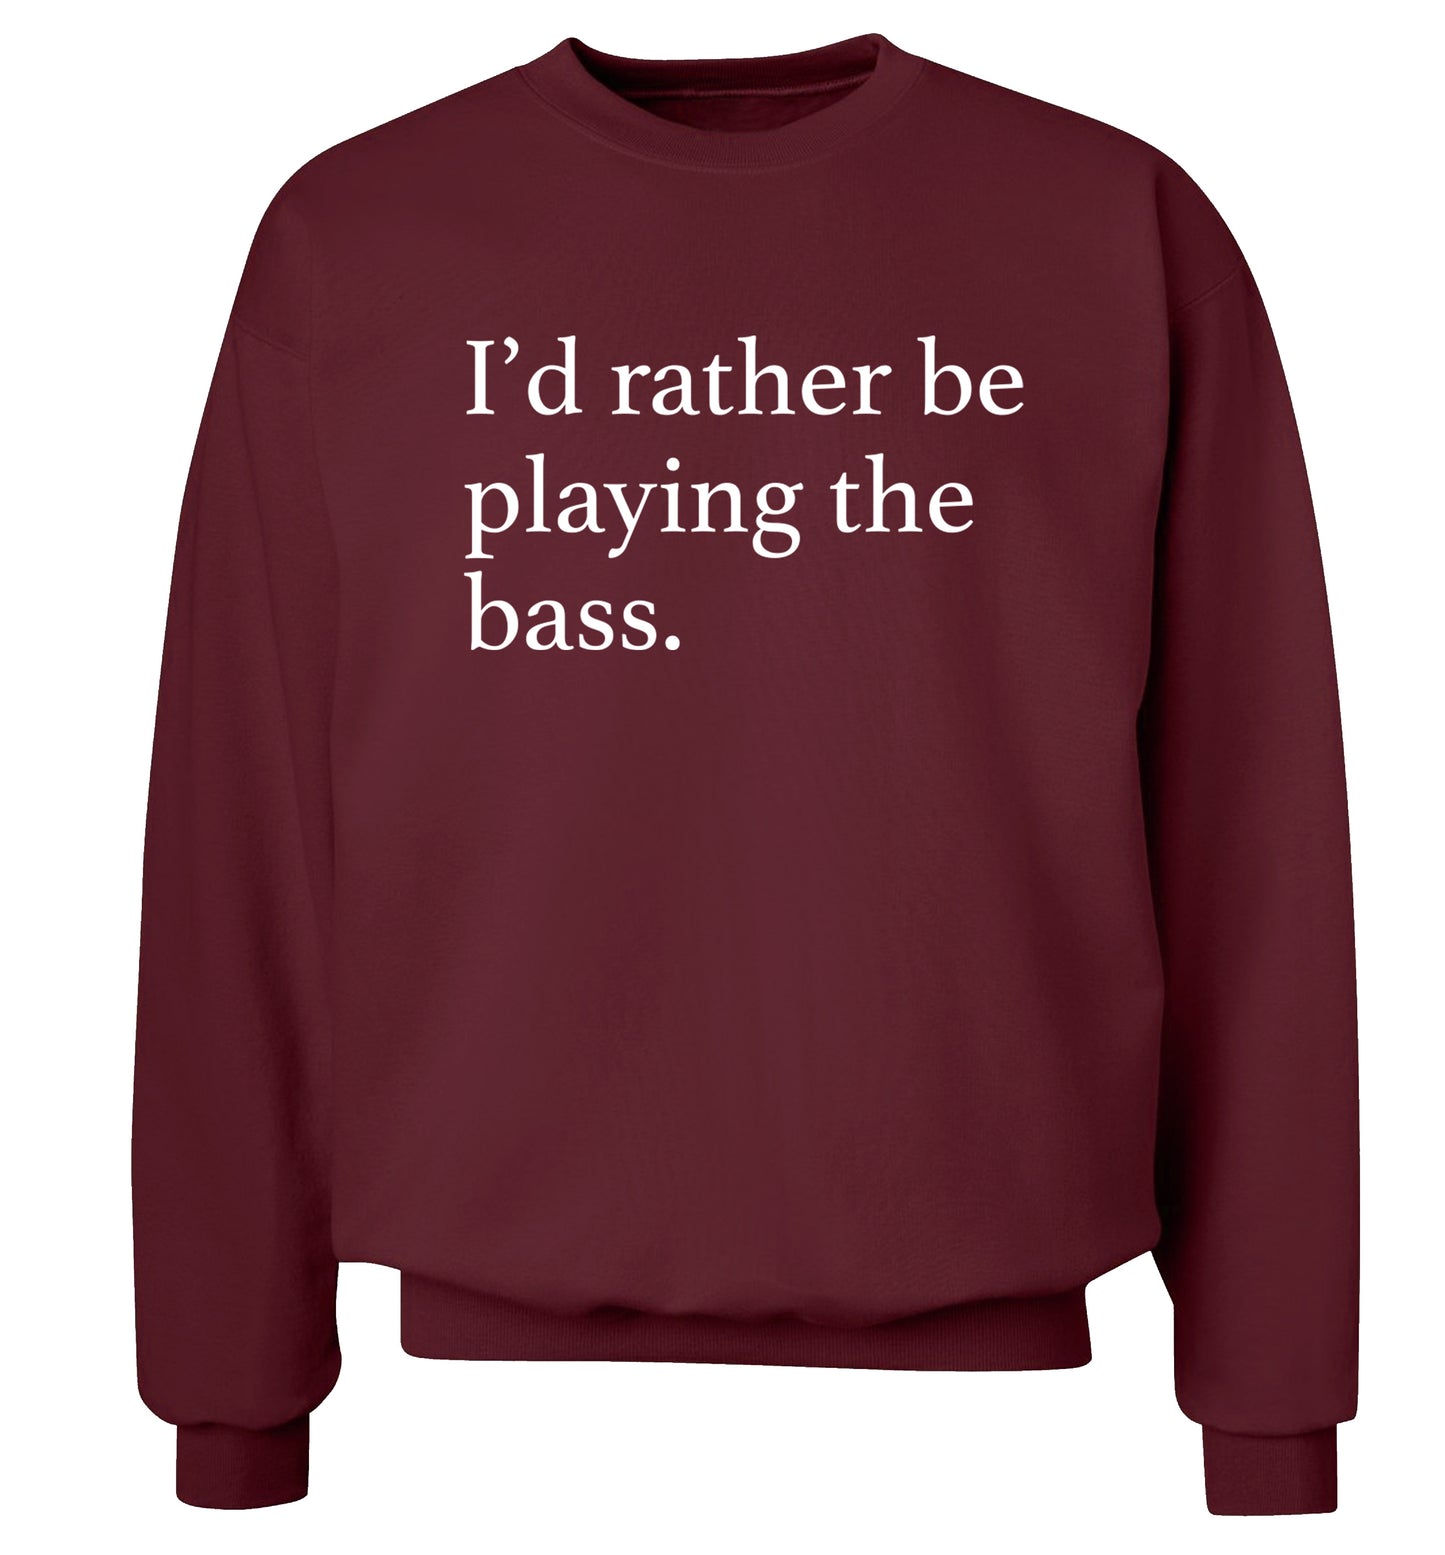 I'd rather by playing the bass Adult's unisex maroon Sweater 2XL